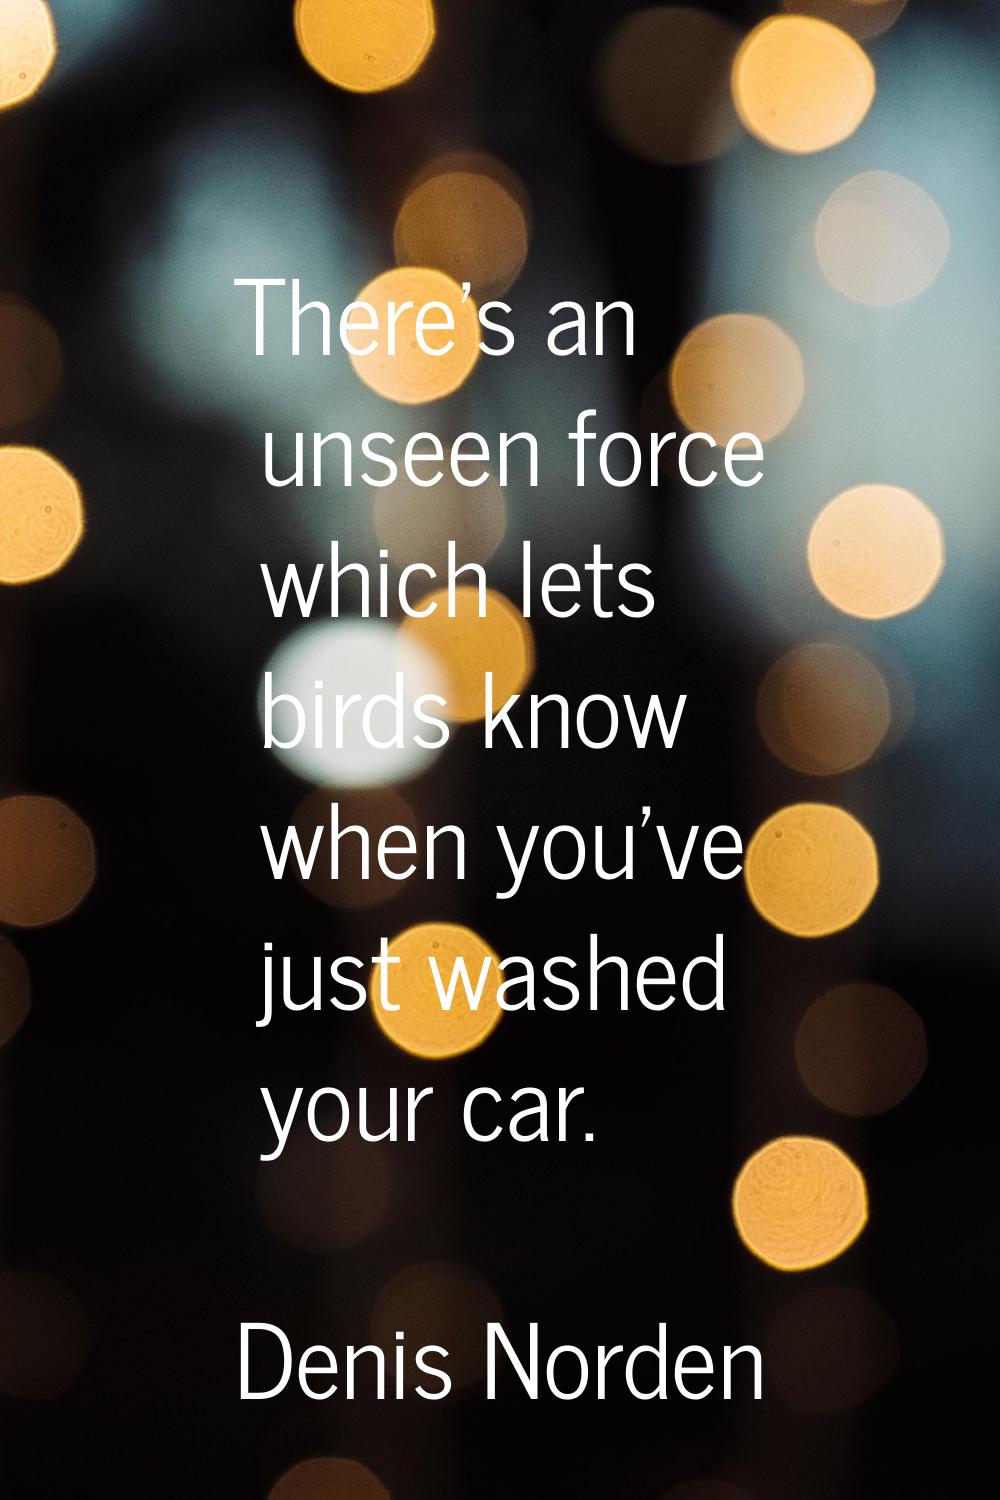 There's an unseen force which lets birds know when you've just washed your car.